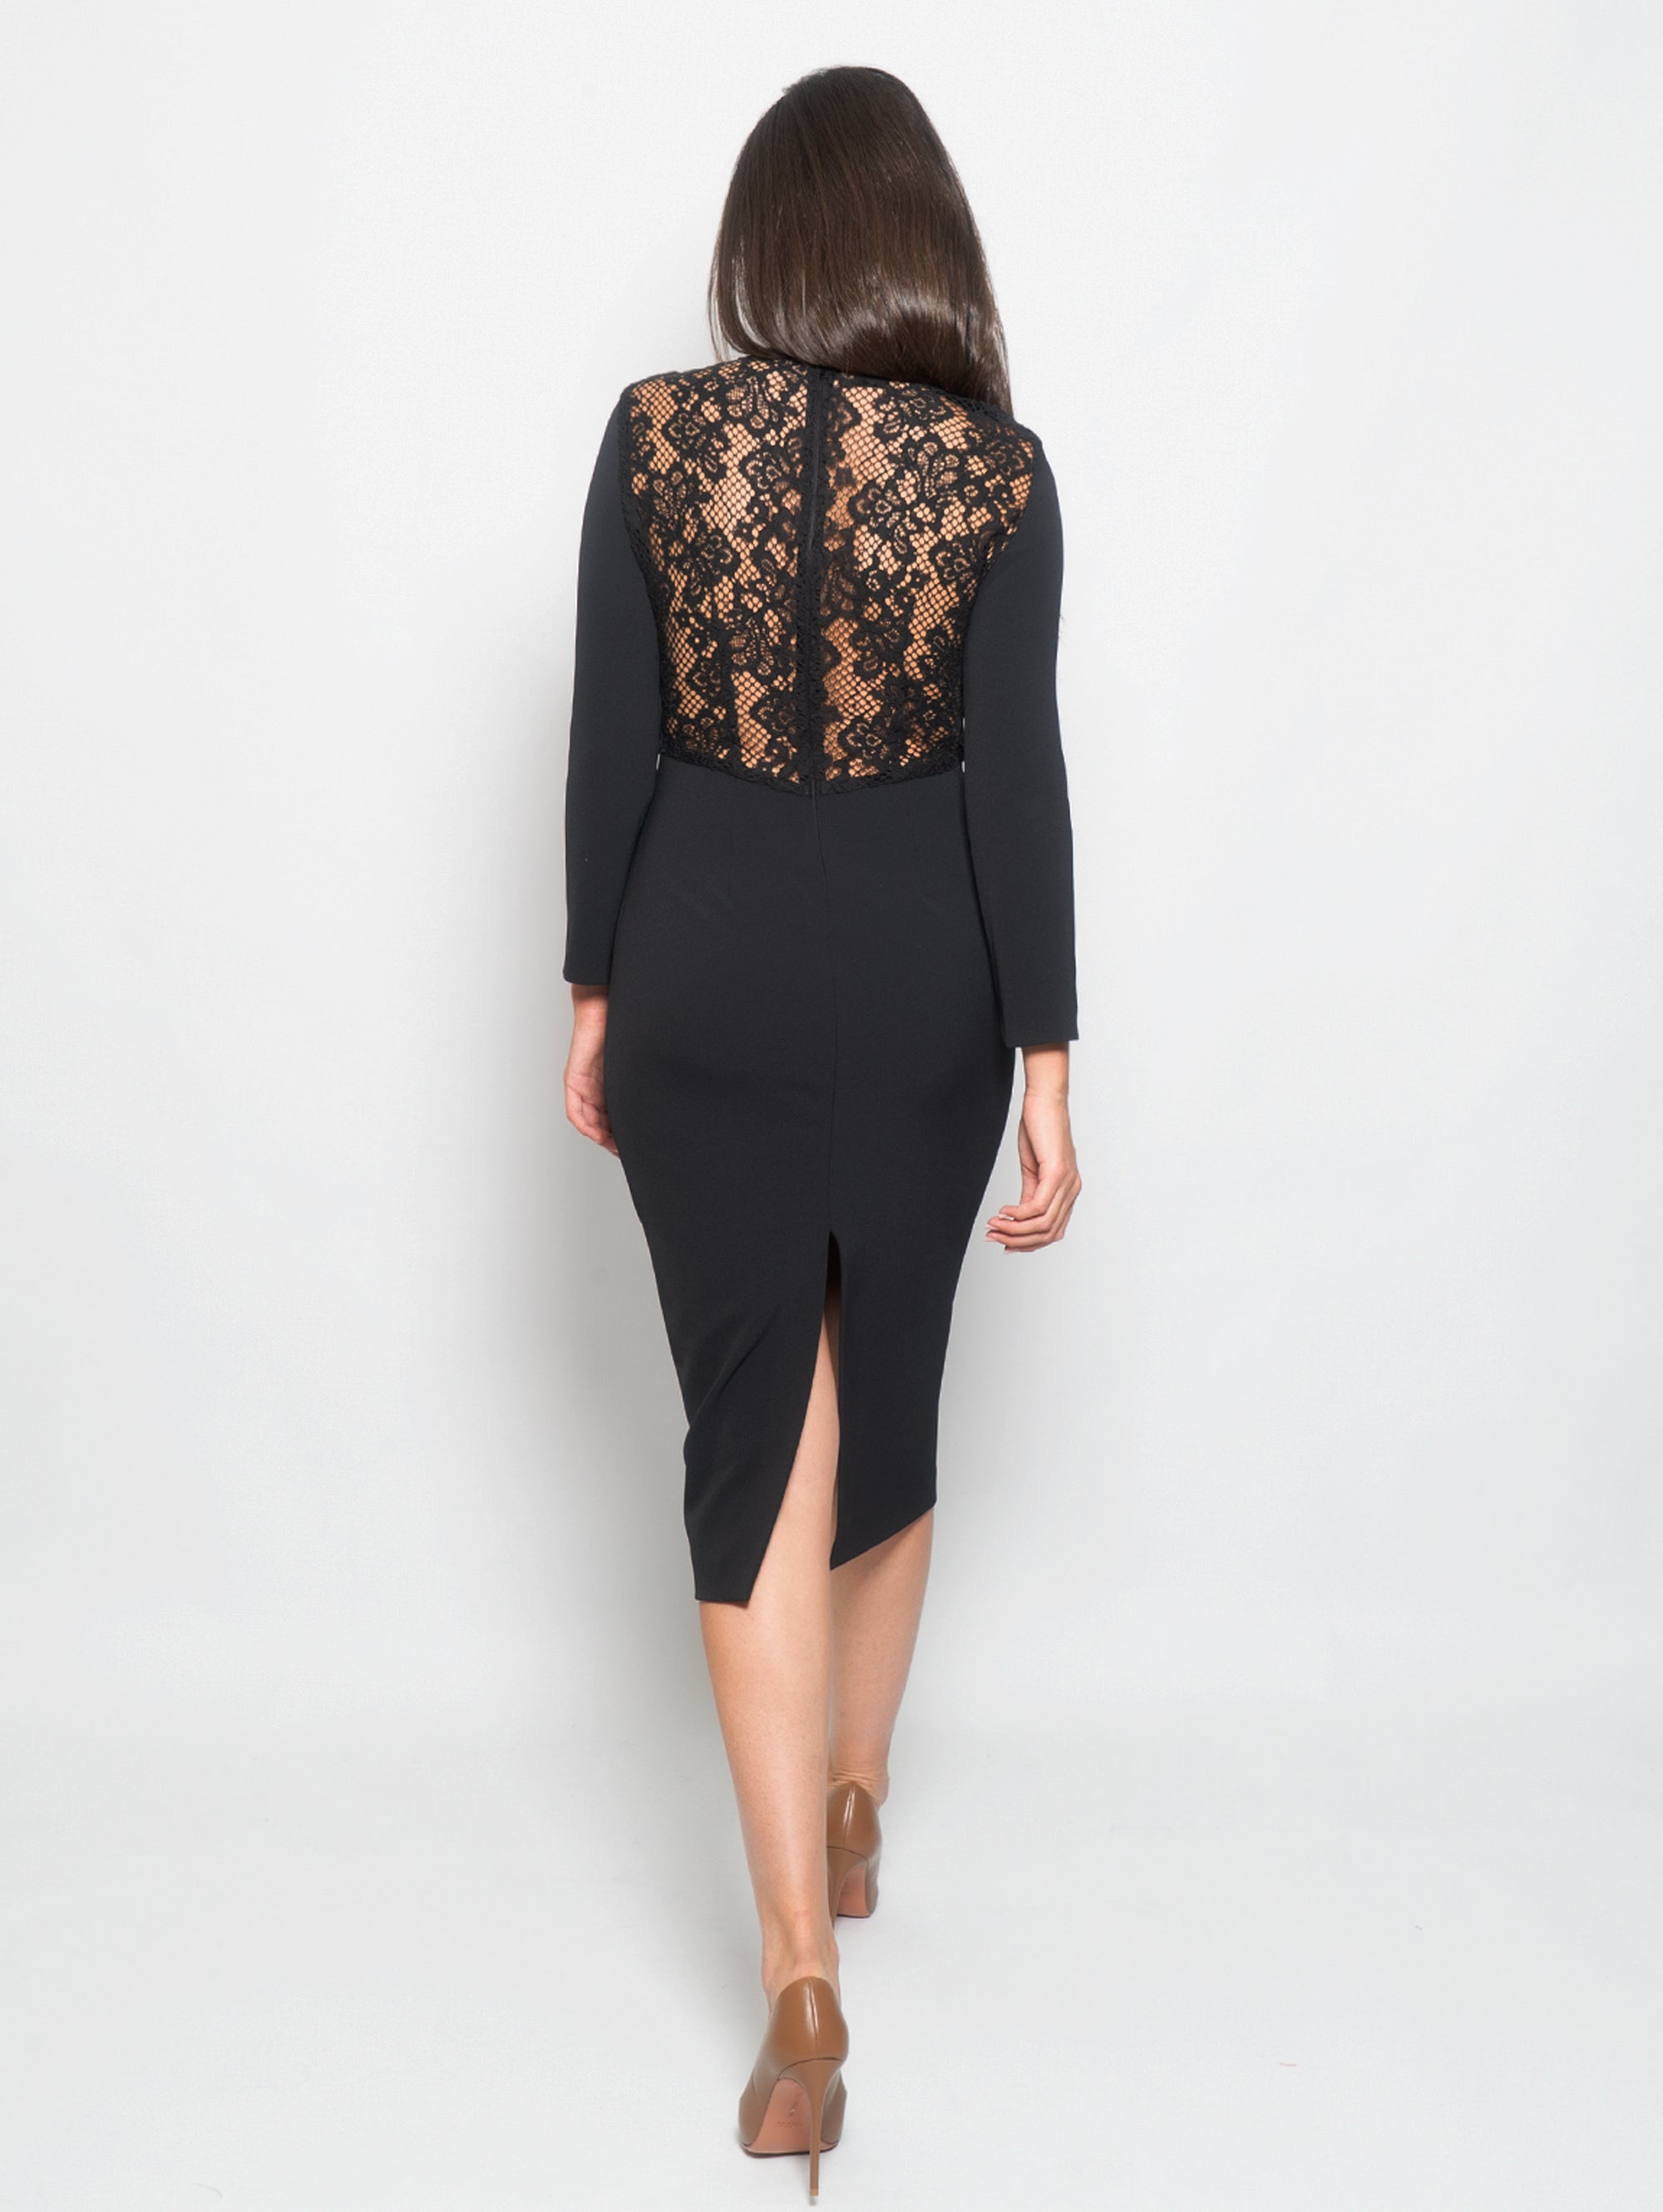 Crepe dress with black lace insert